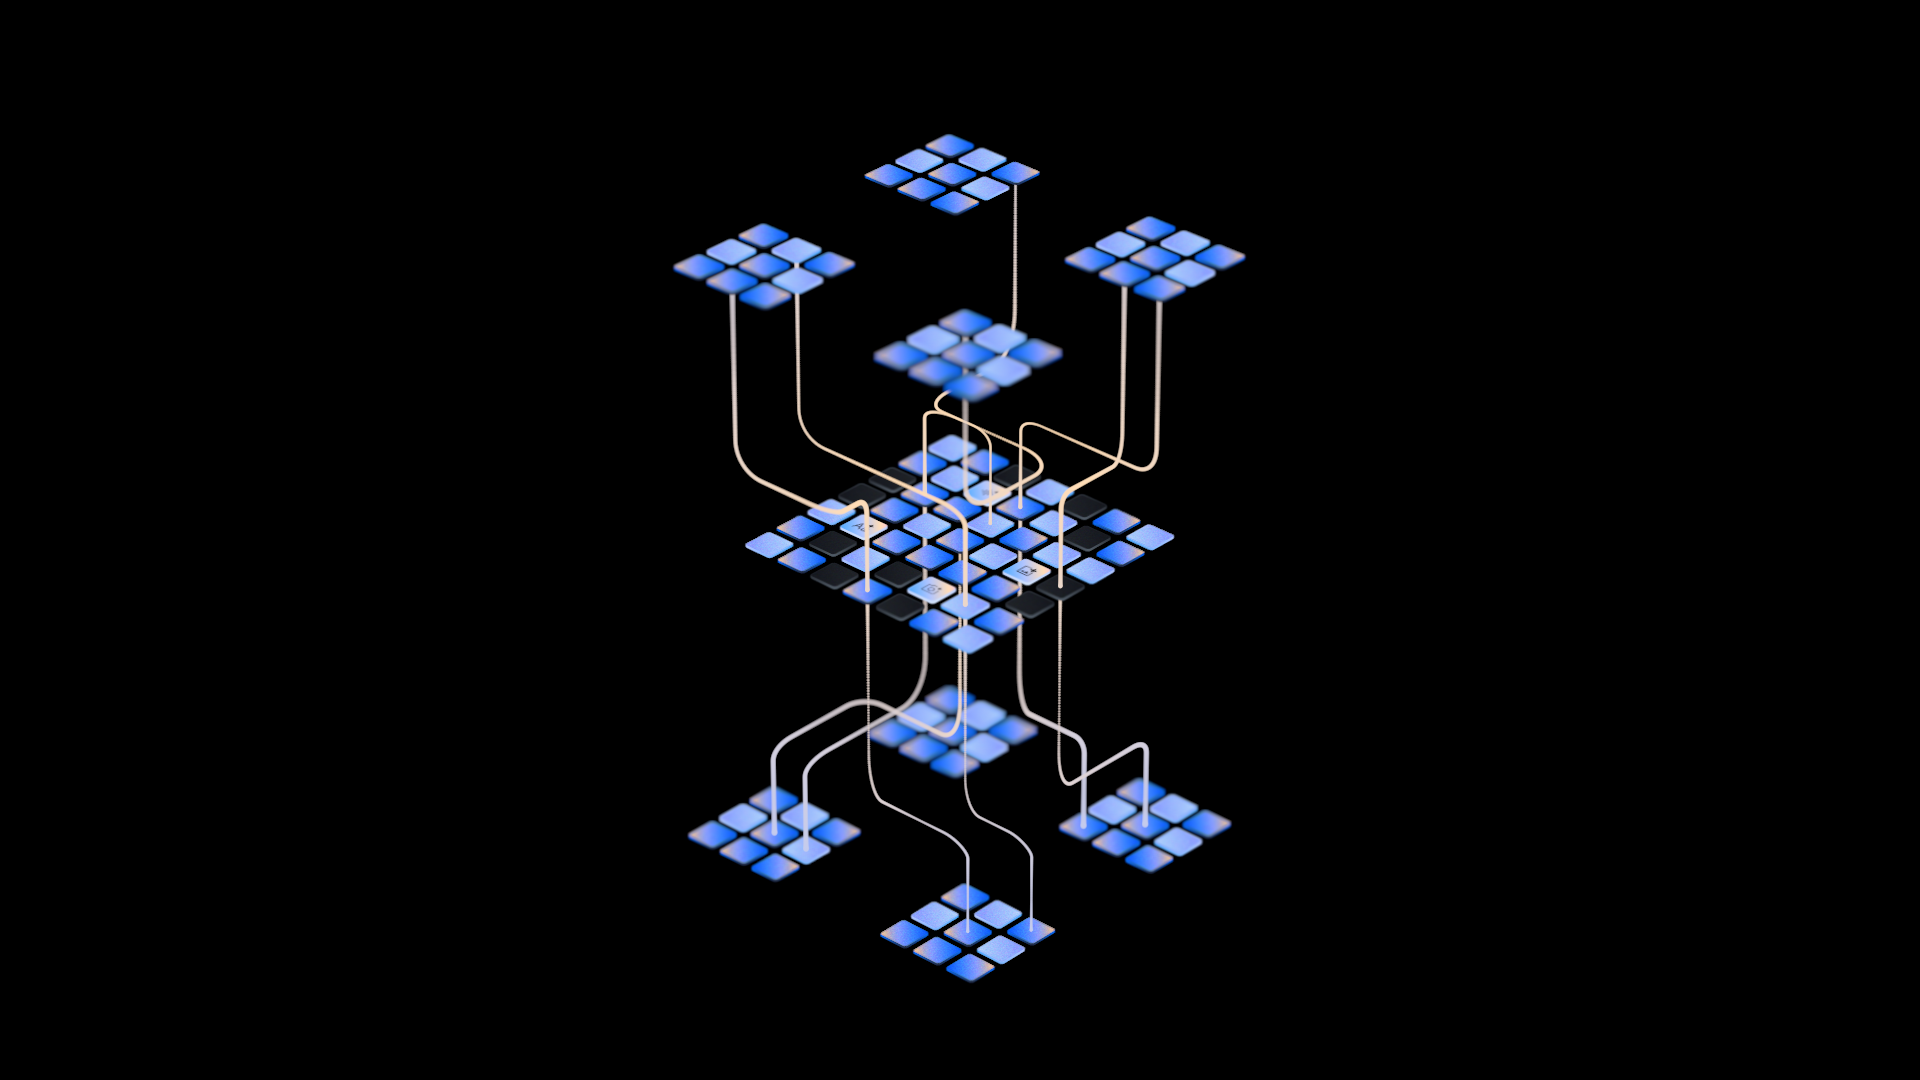 representation of a multimodal AI system showing squares linking through an exploded view to a central grid